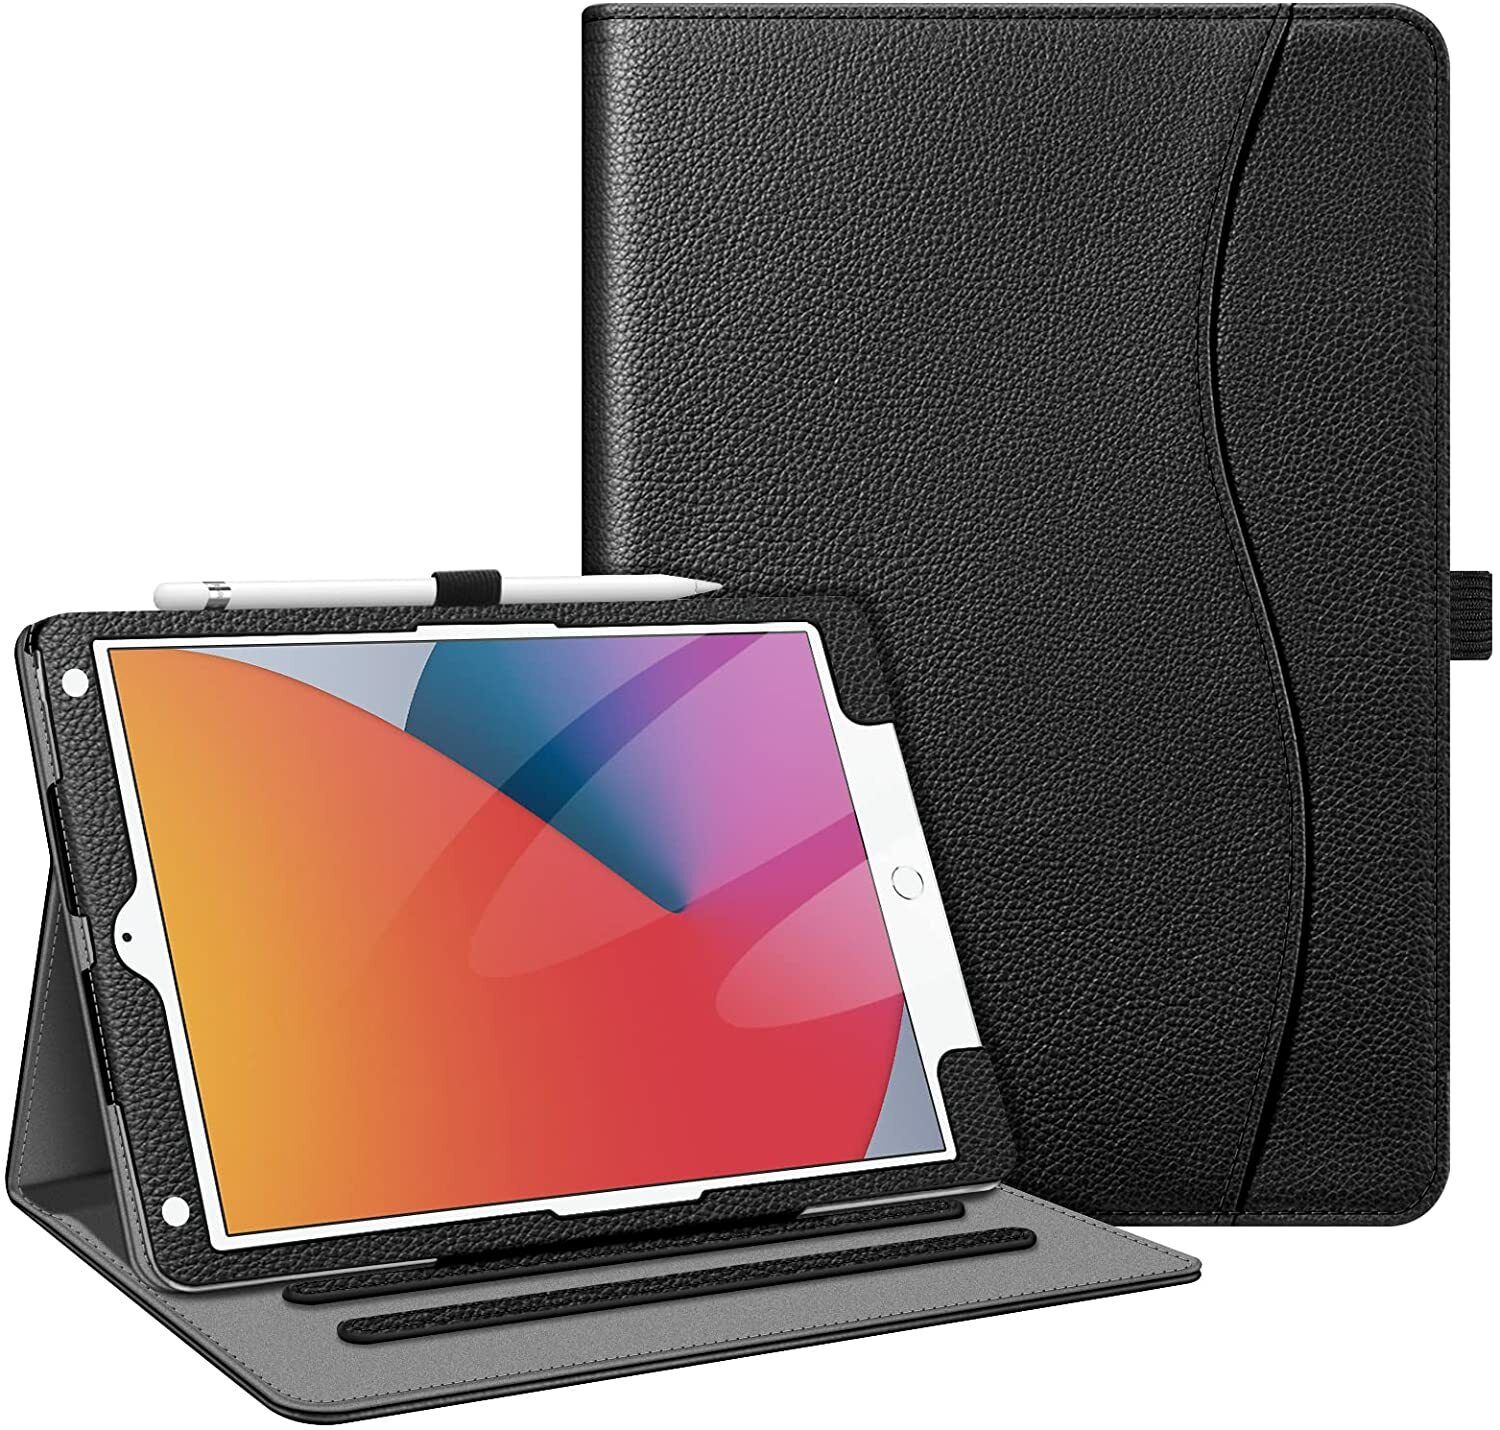 Case for Apple iPad 9th Gen (2021) 10.2 Inch Folio Stand Smart Cover with Pocket